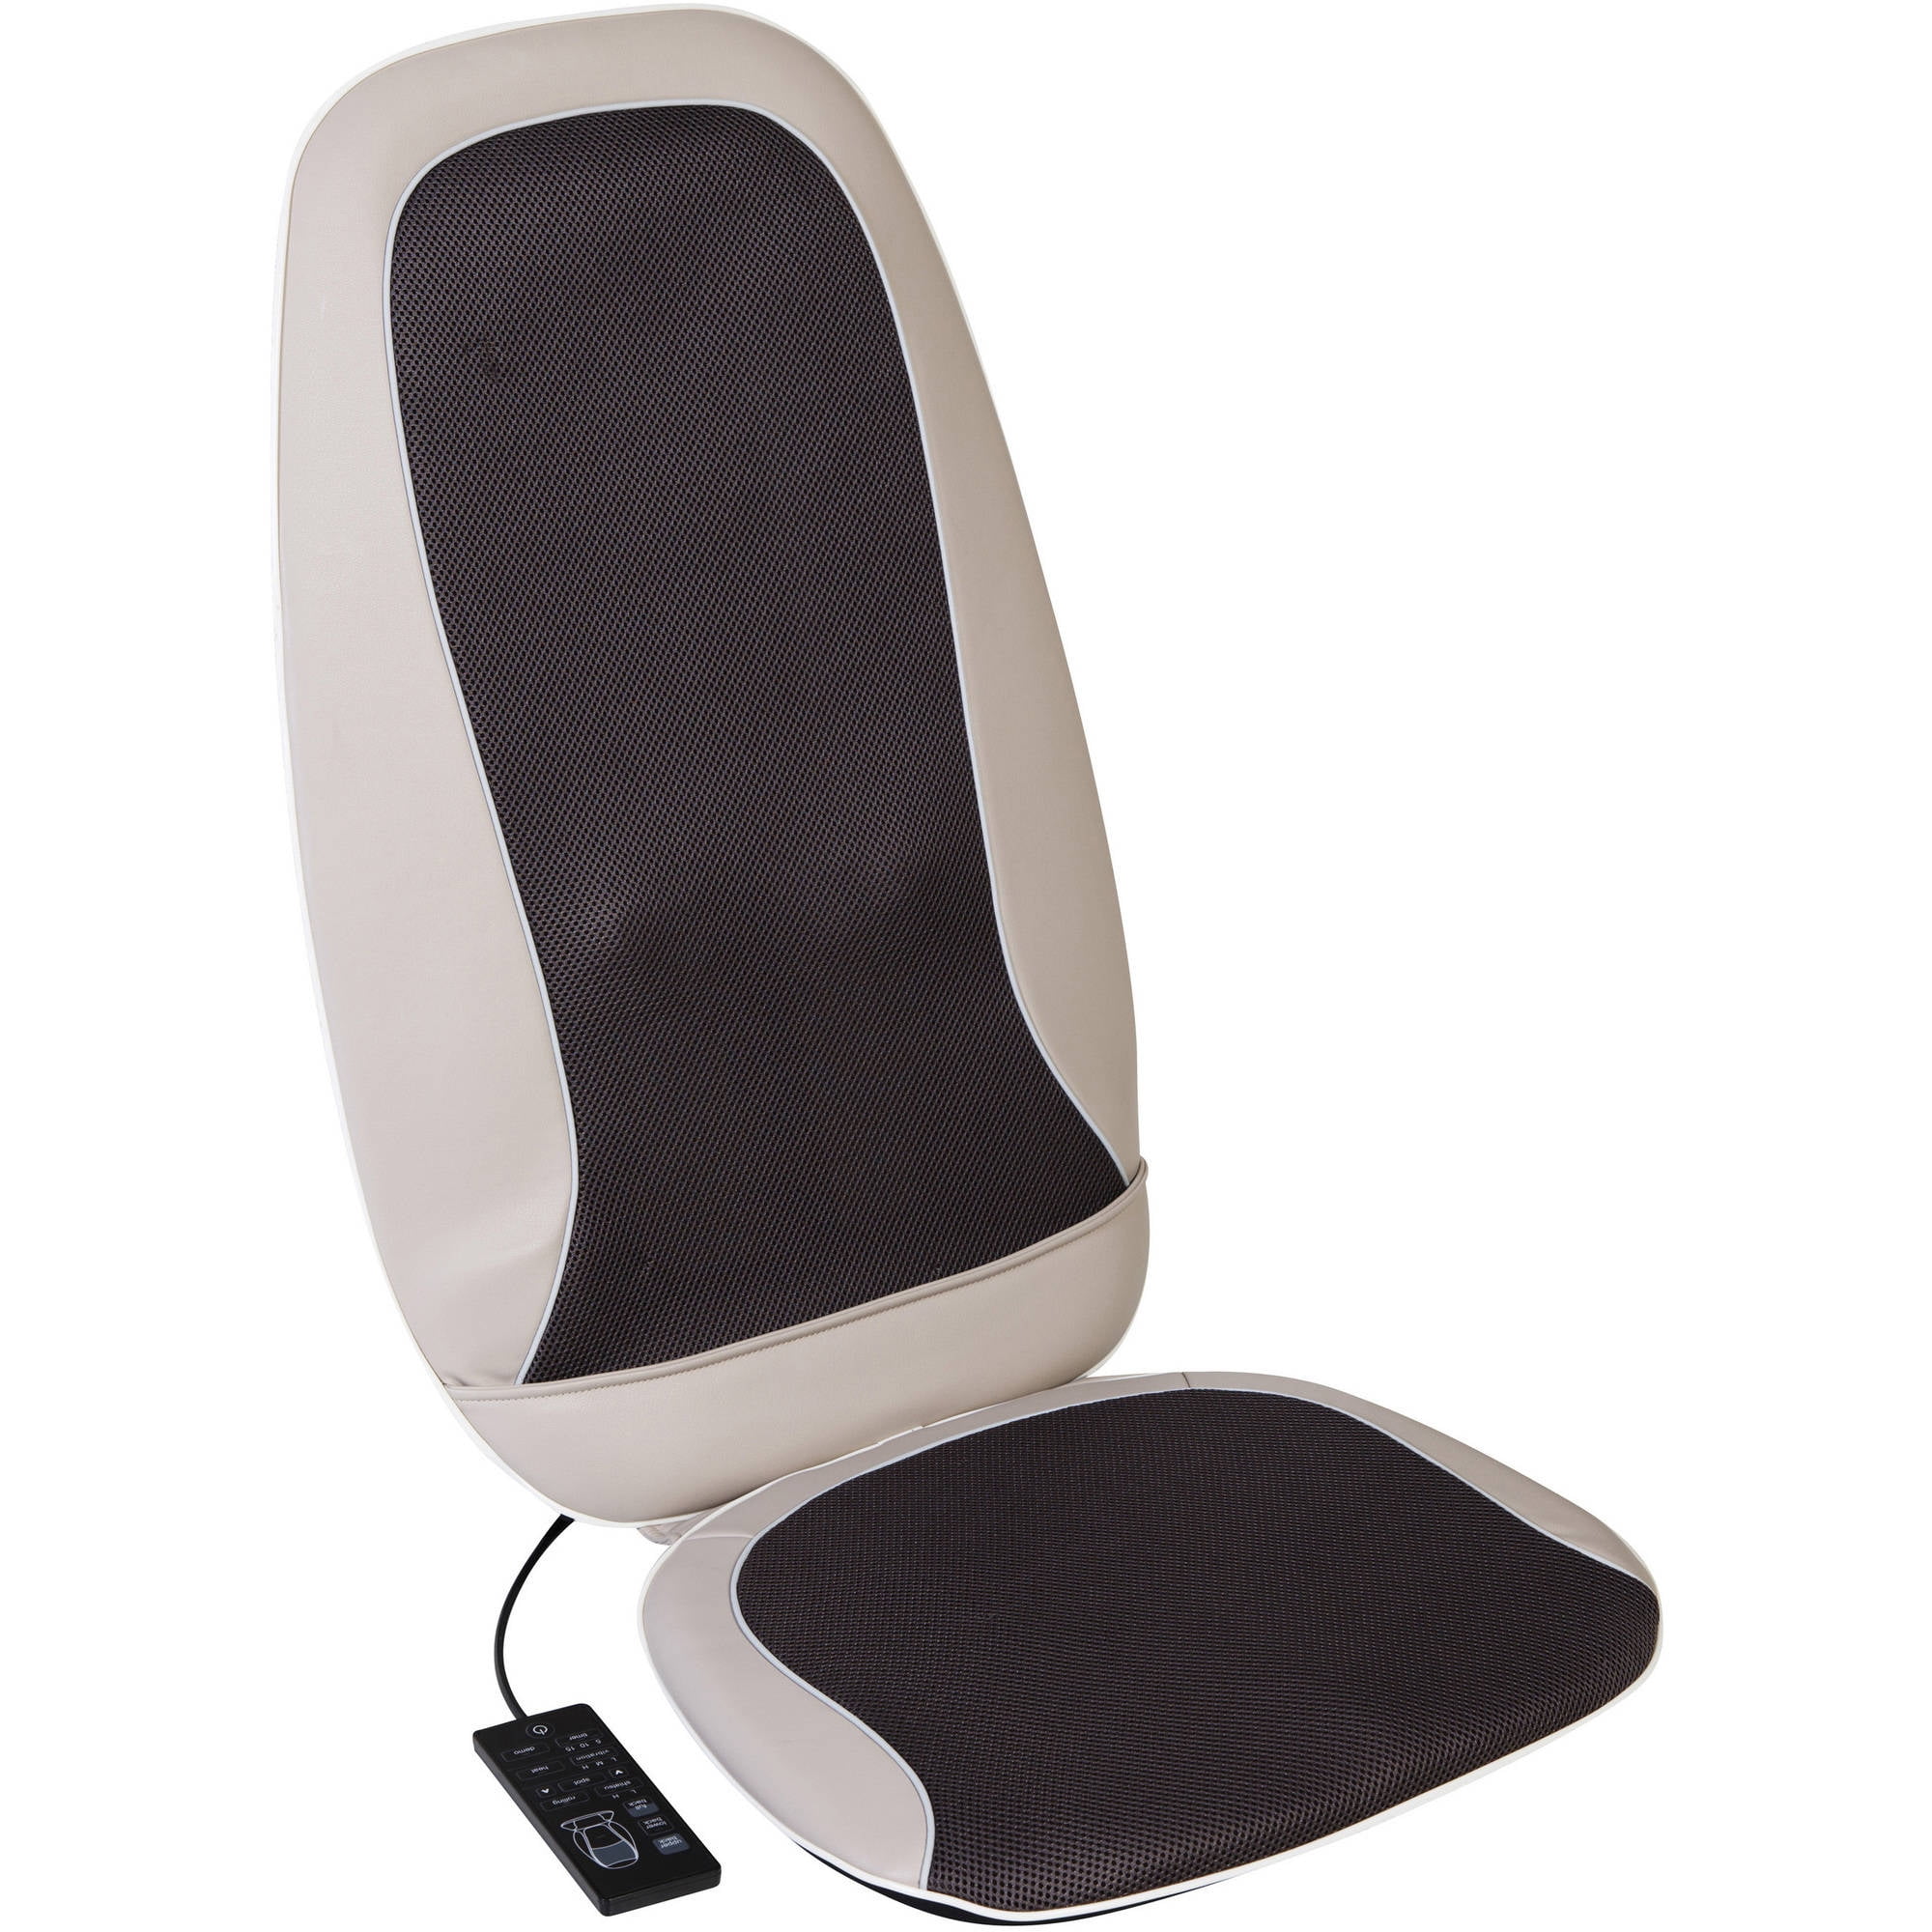 LUCKY ONE Relaxing Grey Massage Chair Cushion TH-6975-GR - The Home Depot